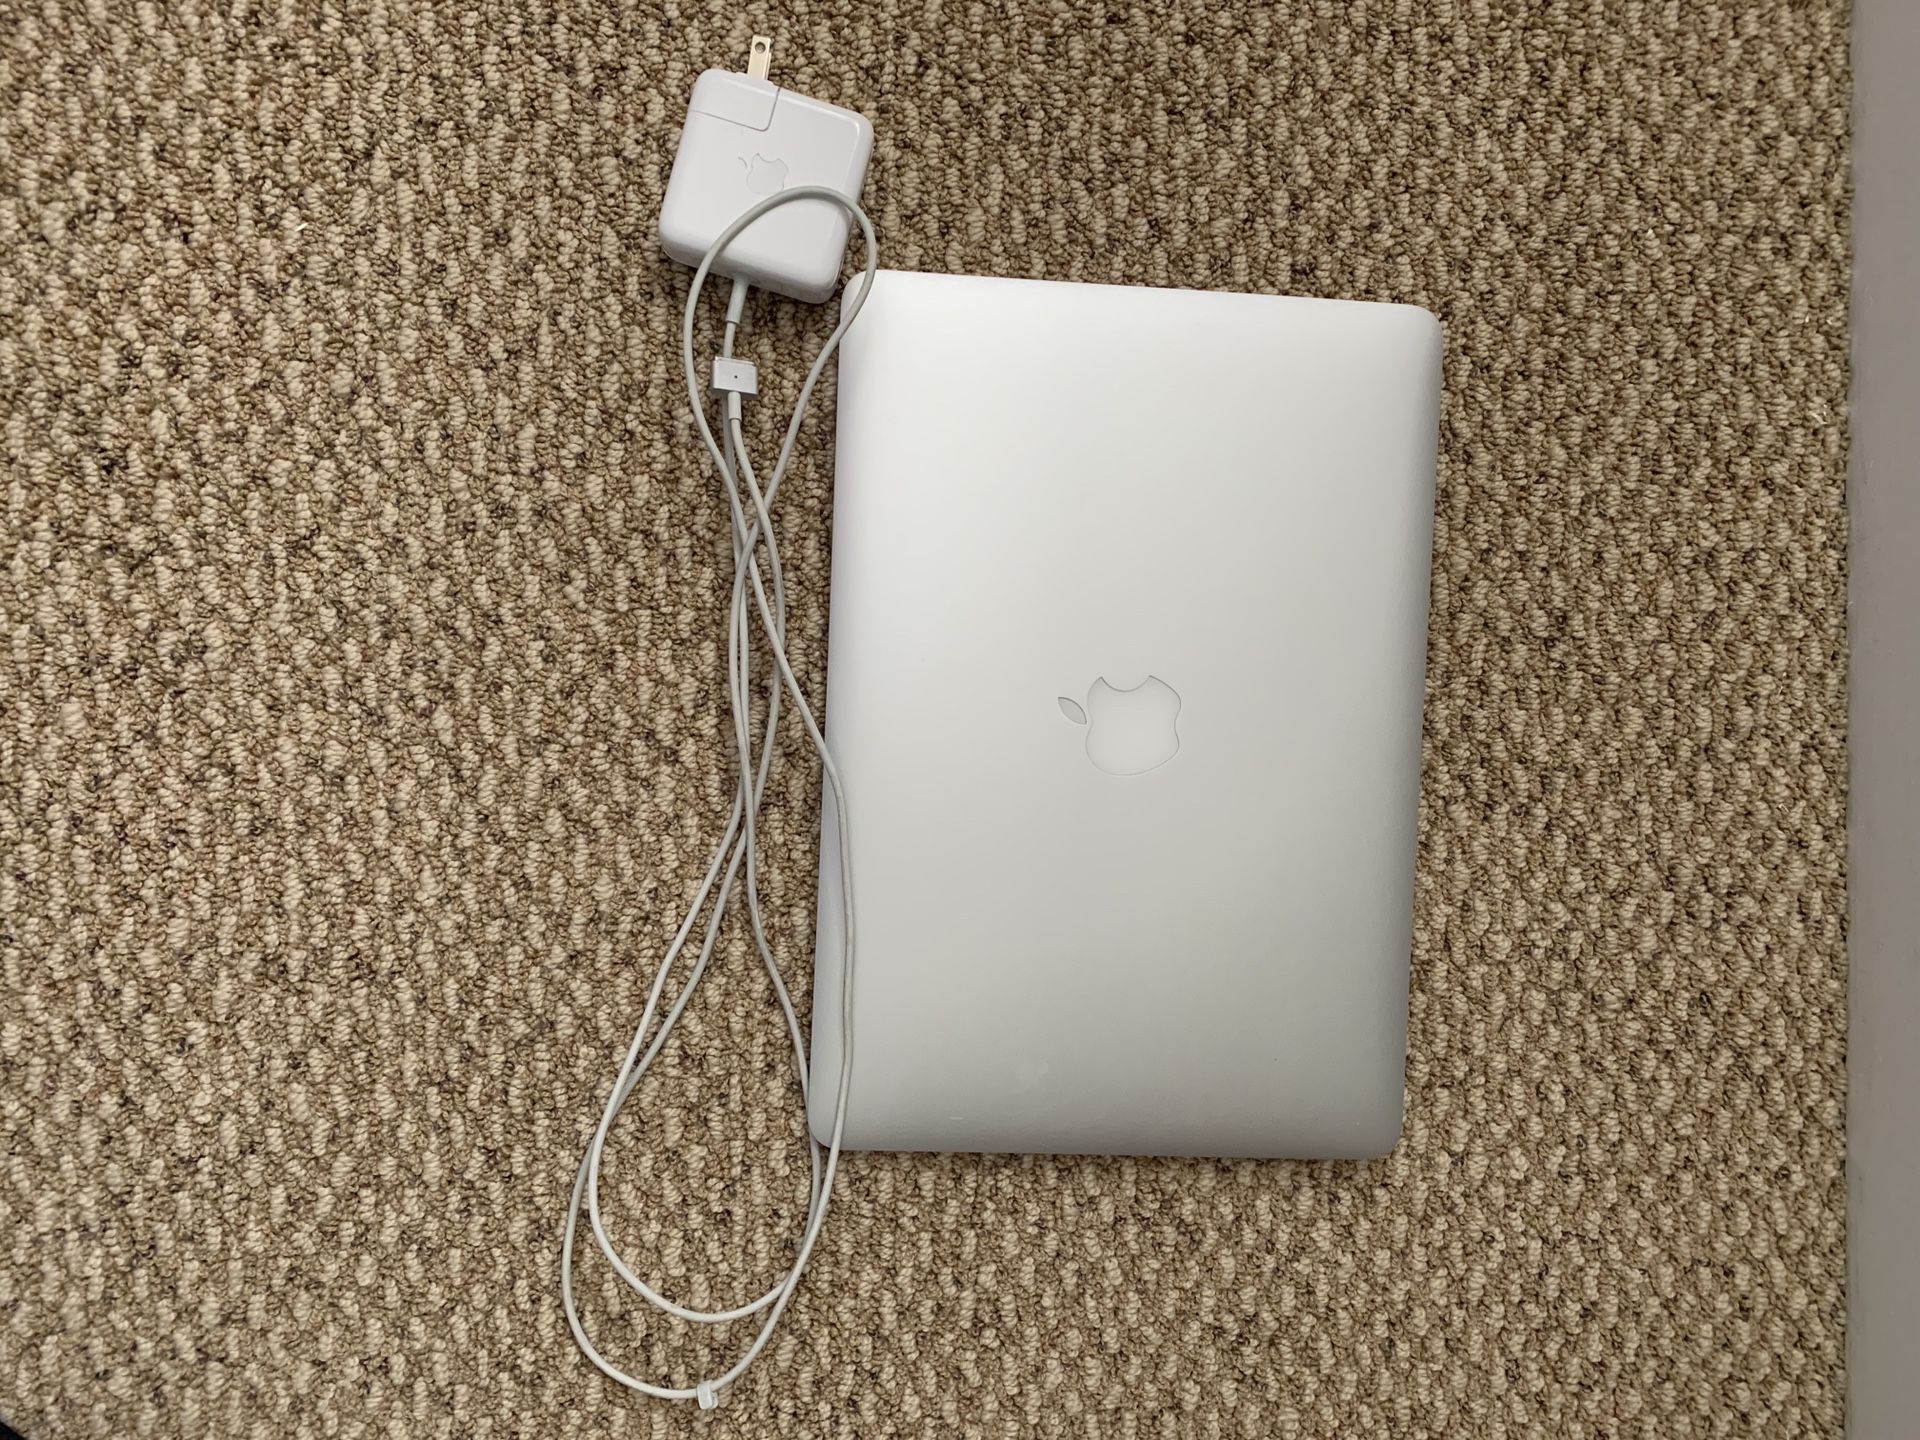 2015 MacBook Air 13” & Charger